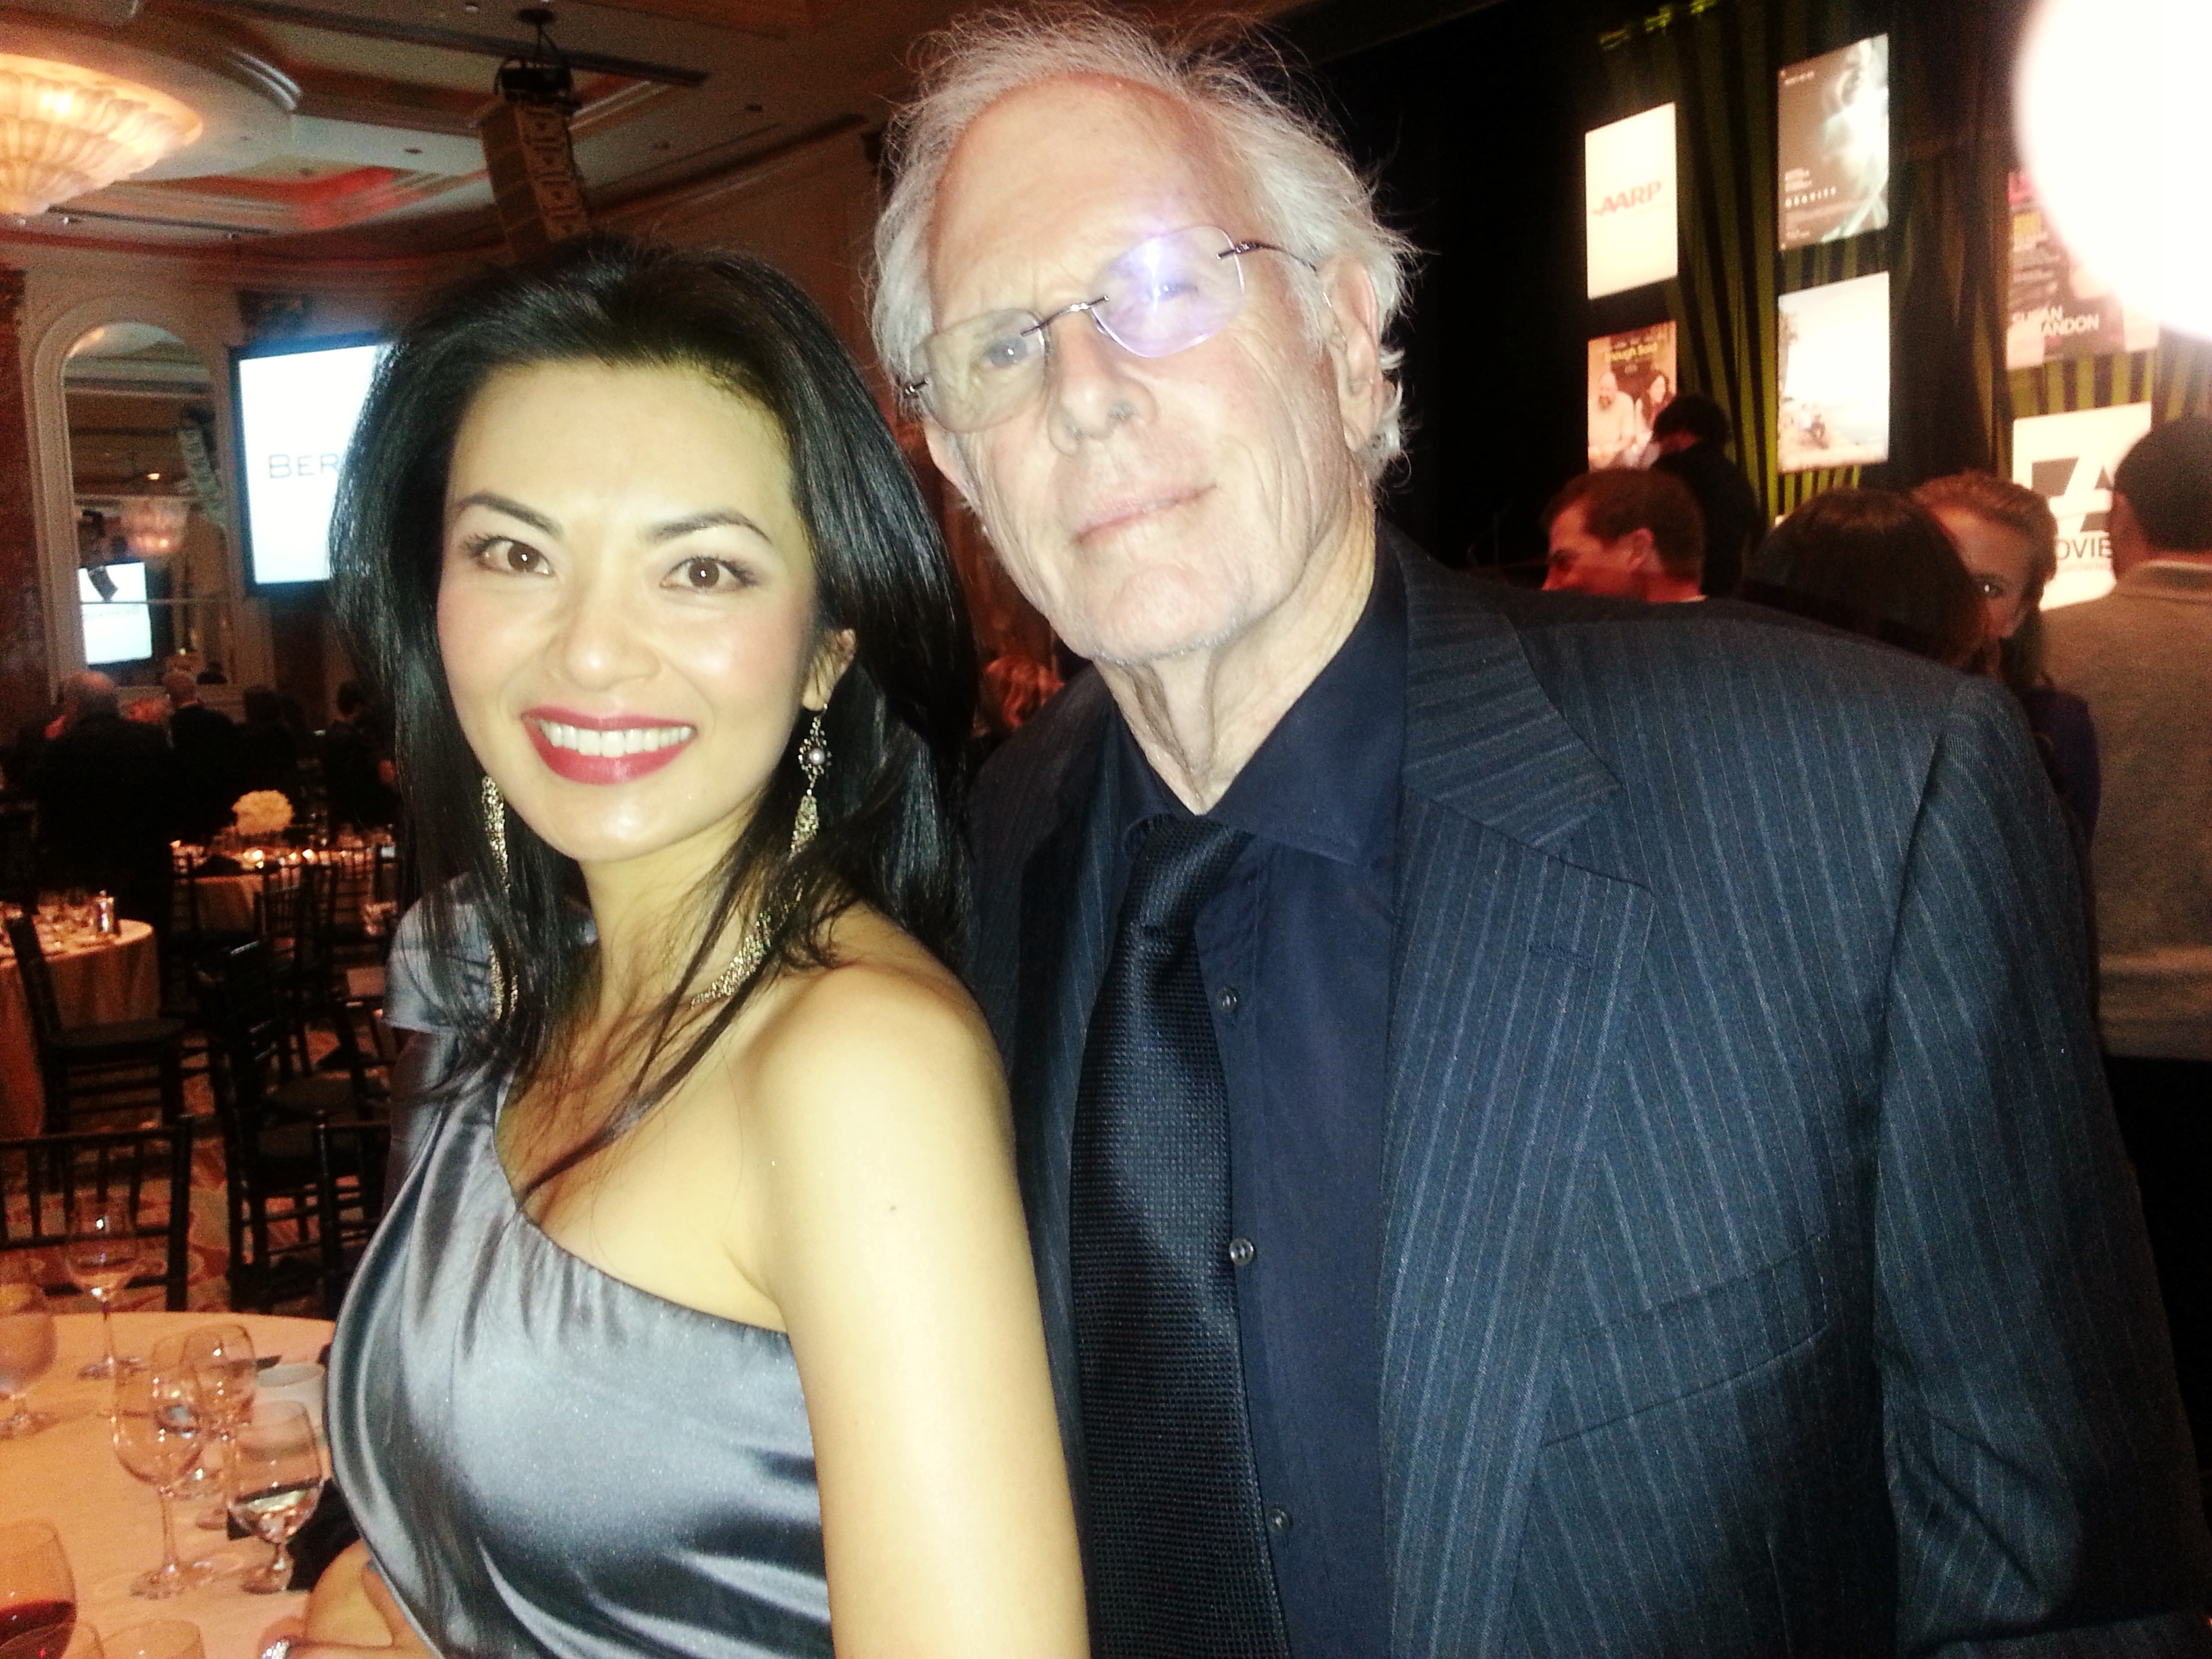 Movies for Grownups awards Gala. Post-dinner with Best Actor recipient Bruce Dern.